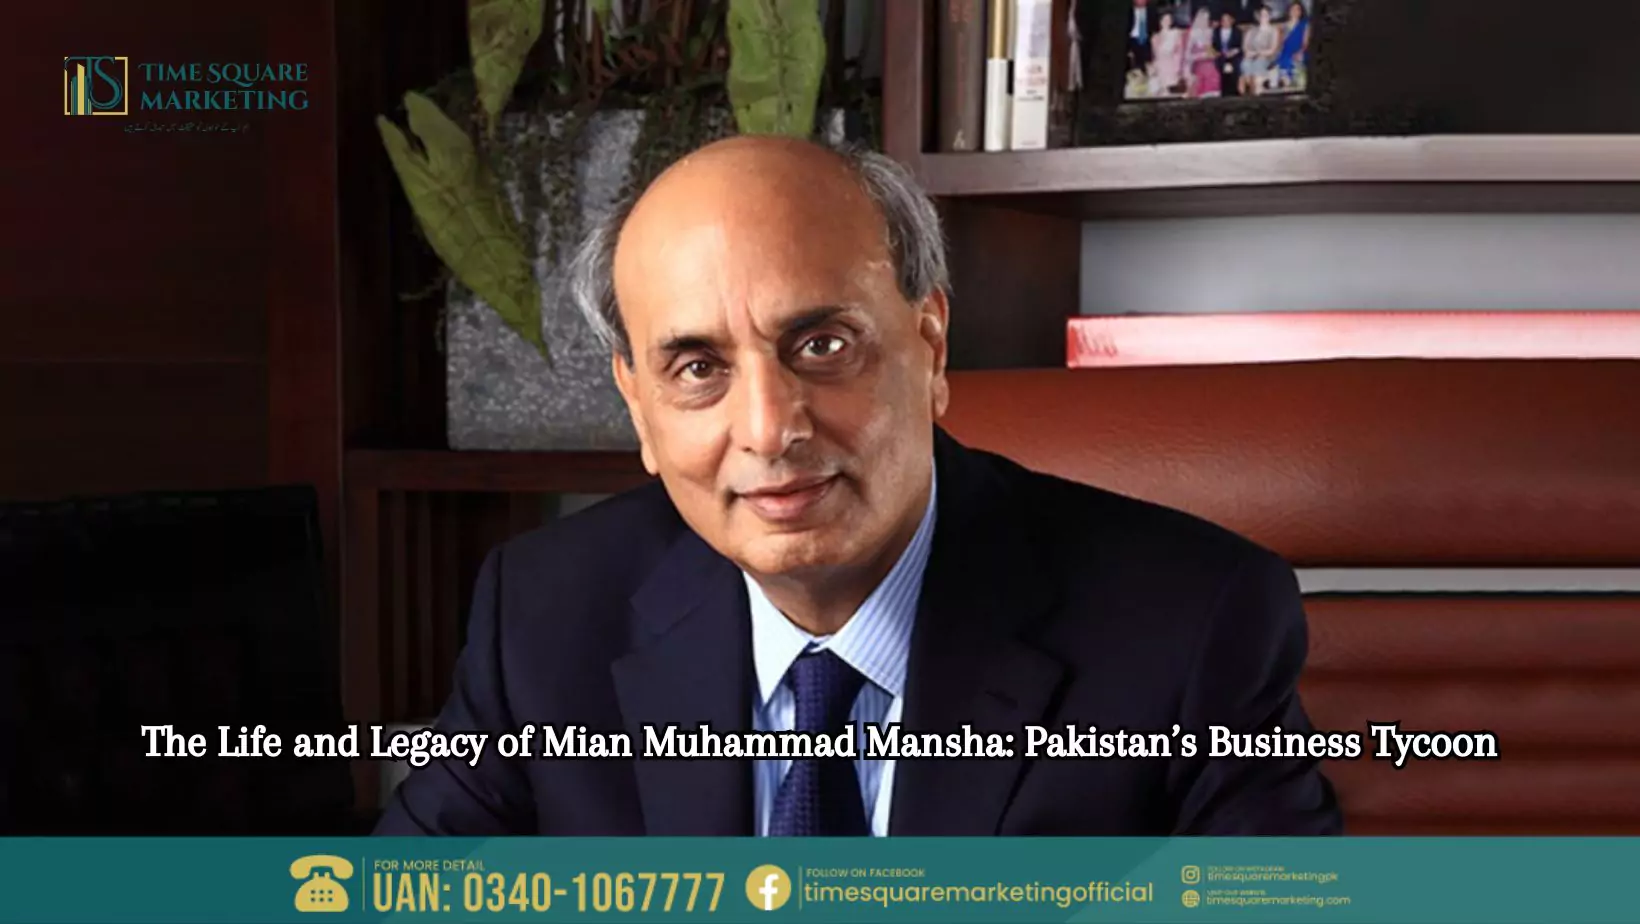 The Life and Legacy of Mian Muhammad Mansha Pakistan’s Business Tycoon